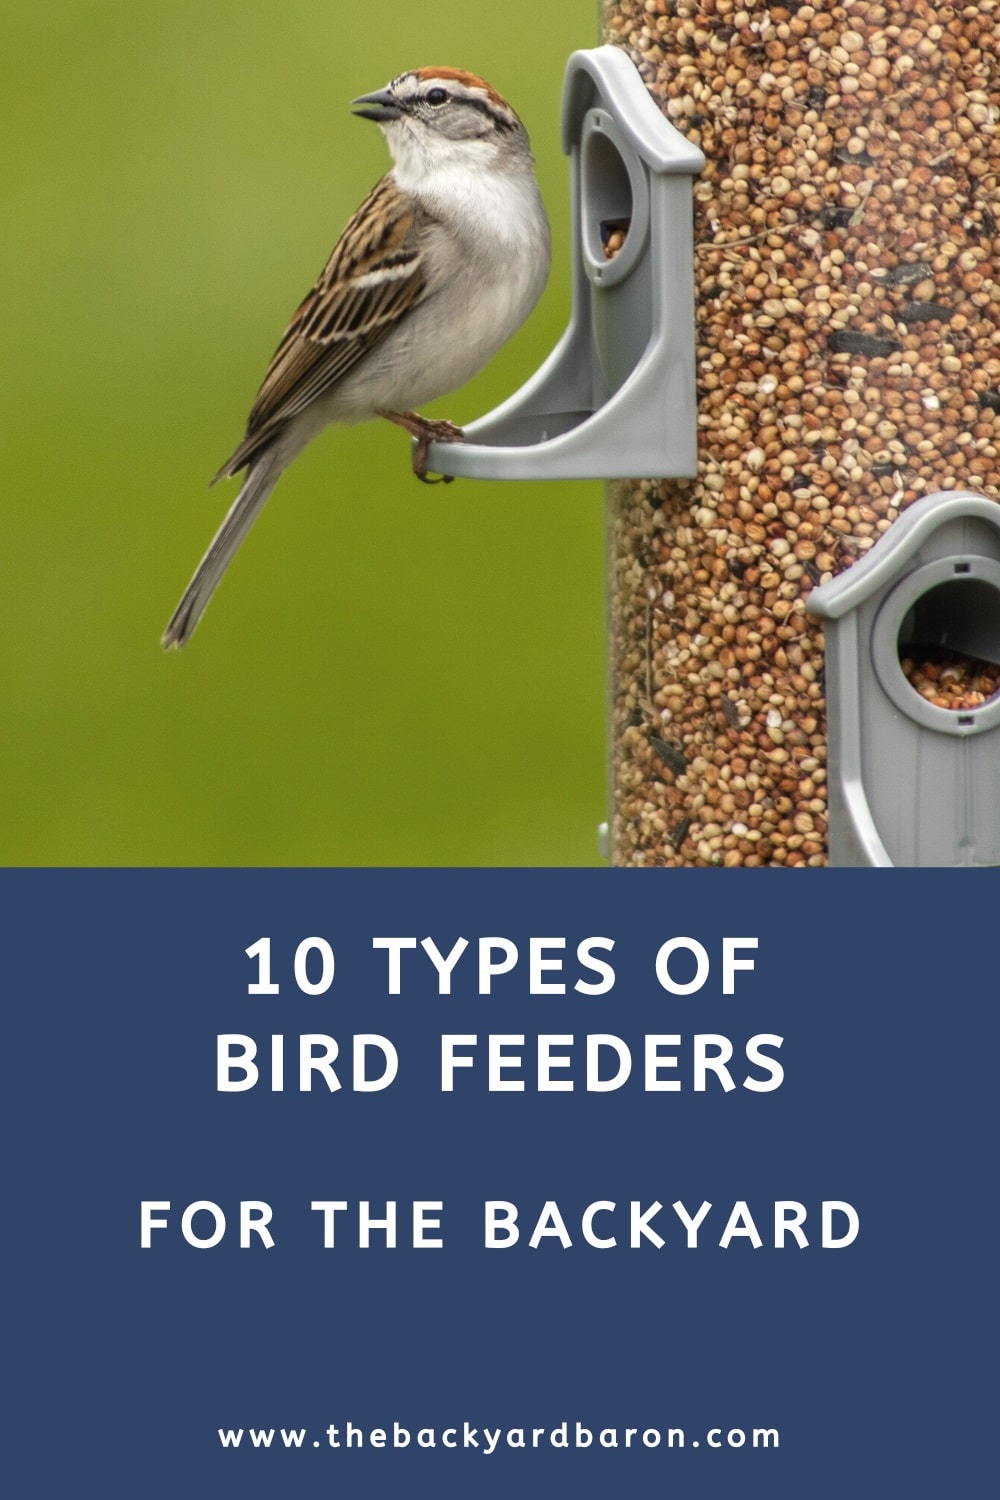 10 Types of bird feeders for the backyard